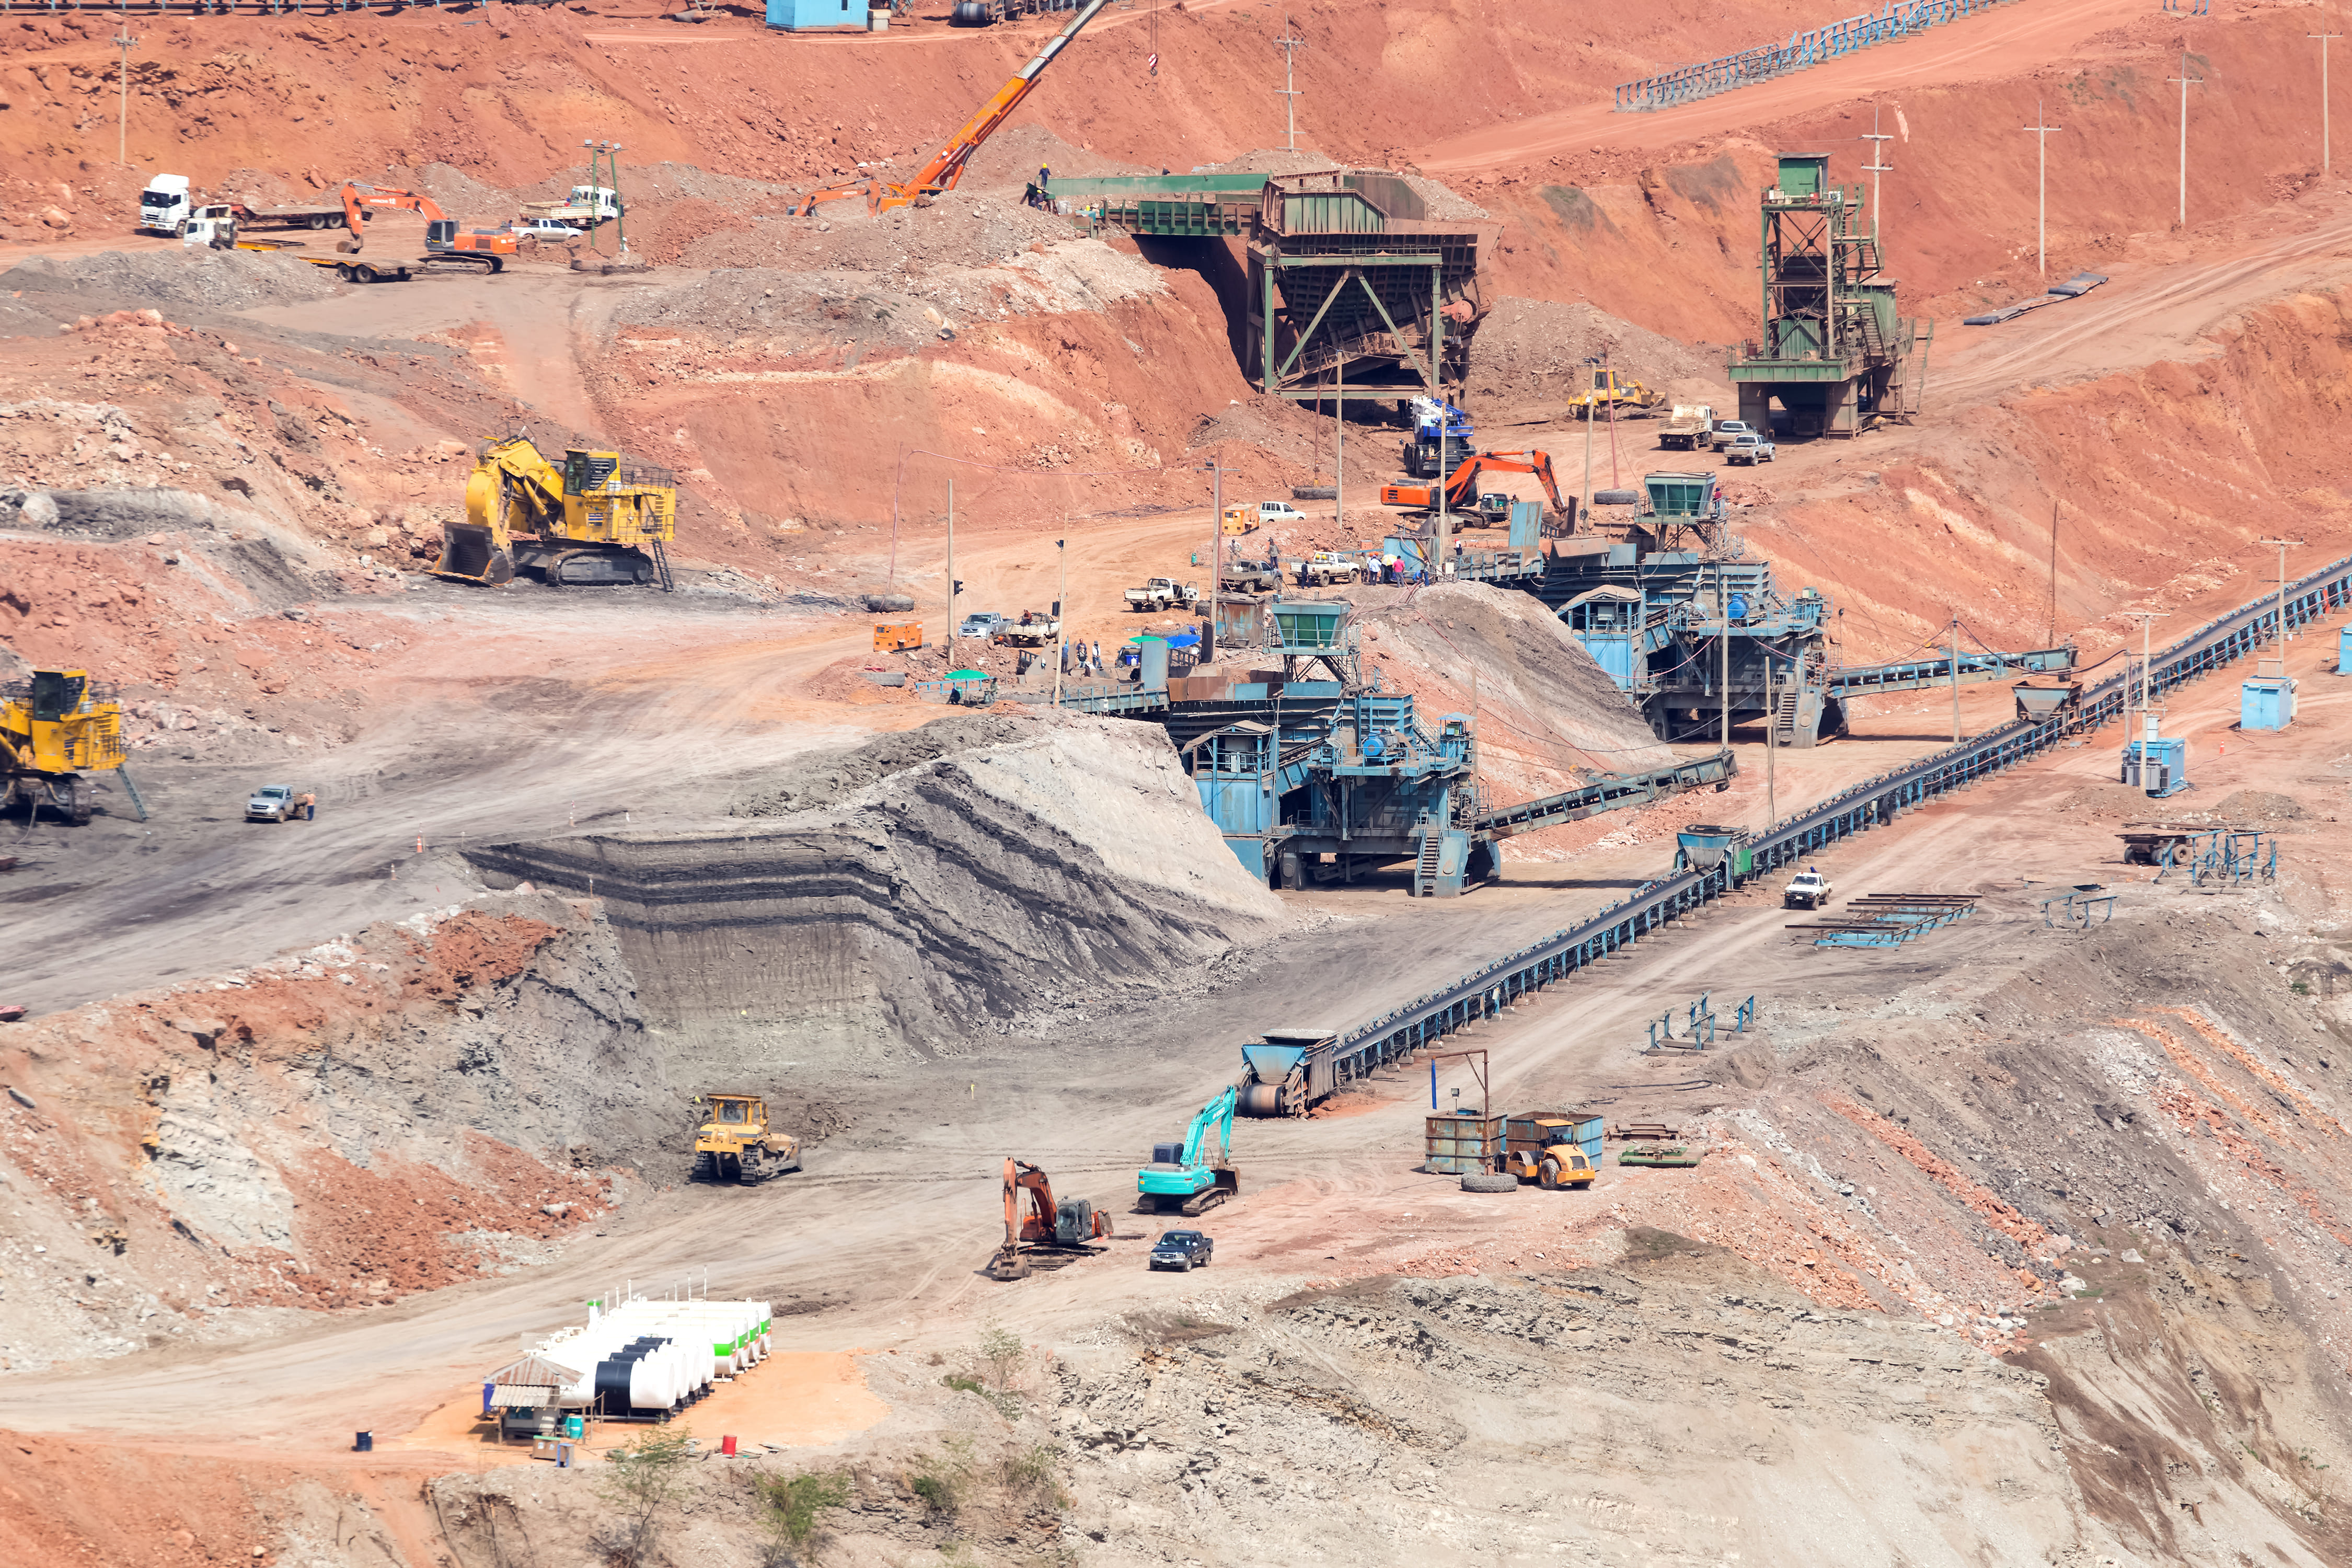 Leading the Mining Industry by example